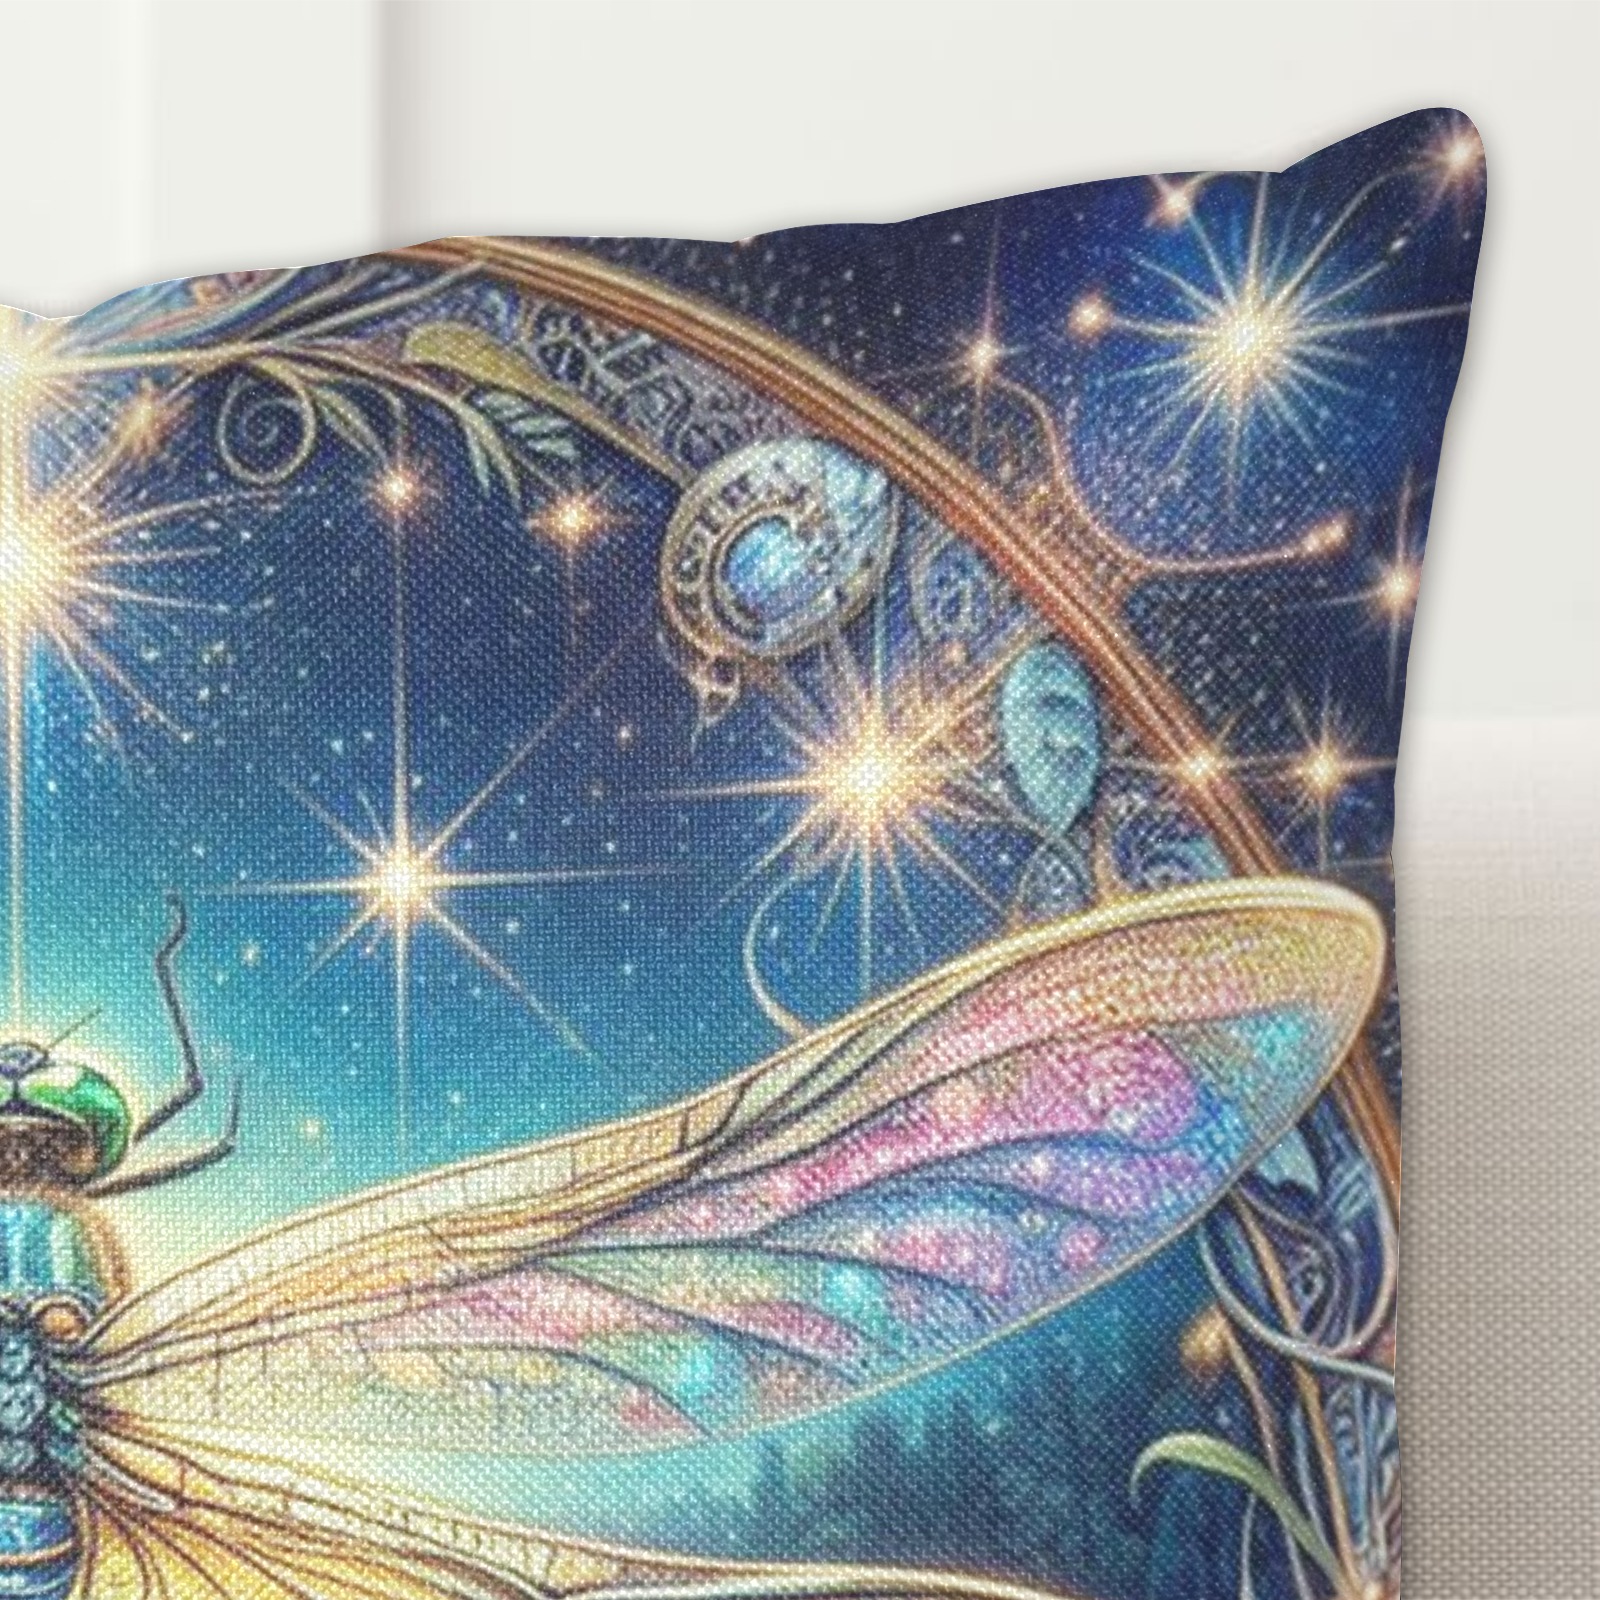 Dragonfly Sparkle Linen Zippered Pillowcase 18"x18"(Two Sides)